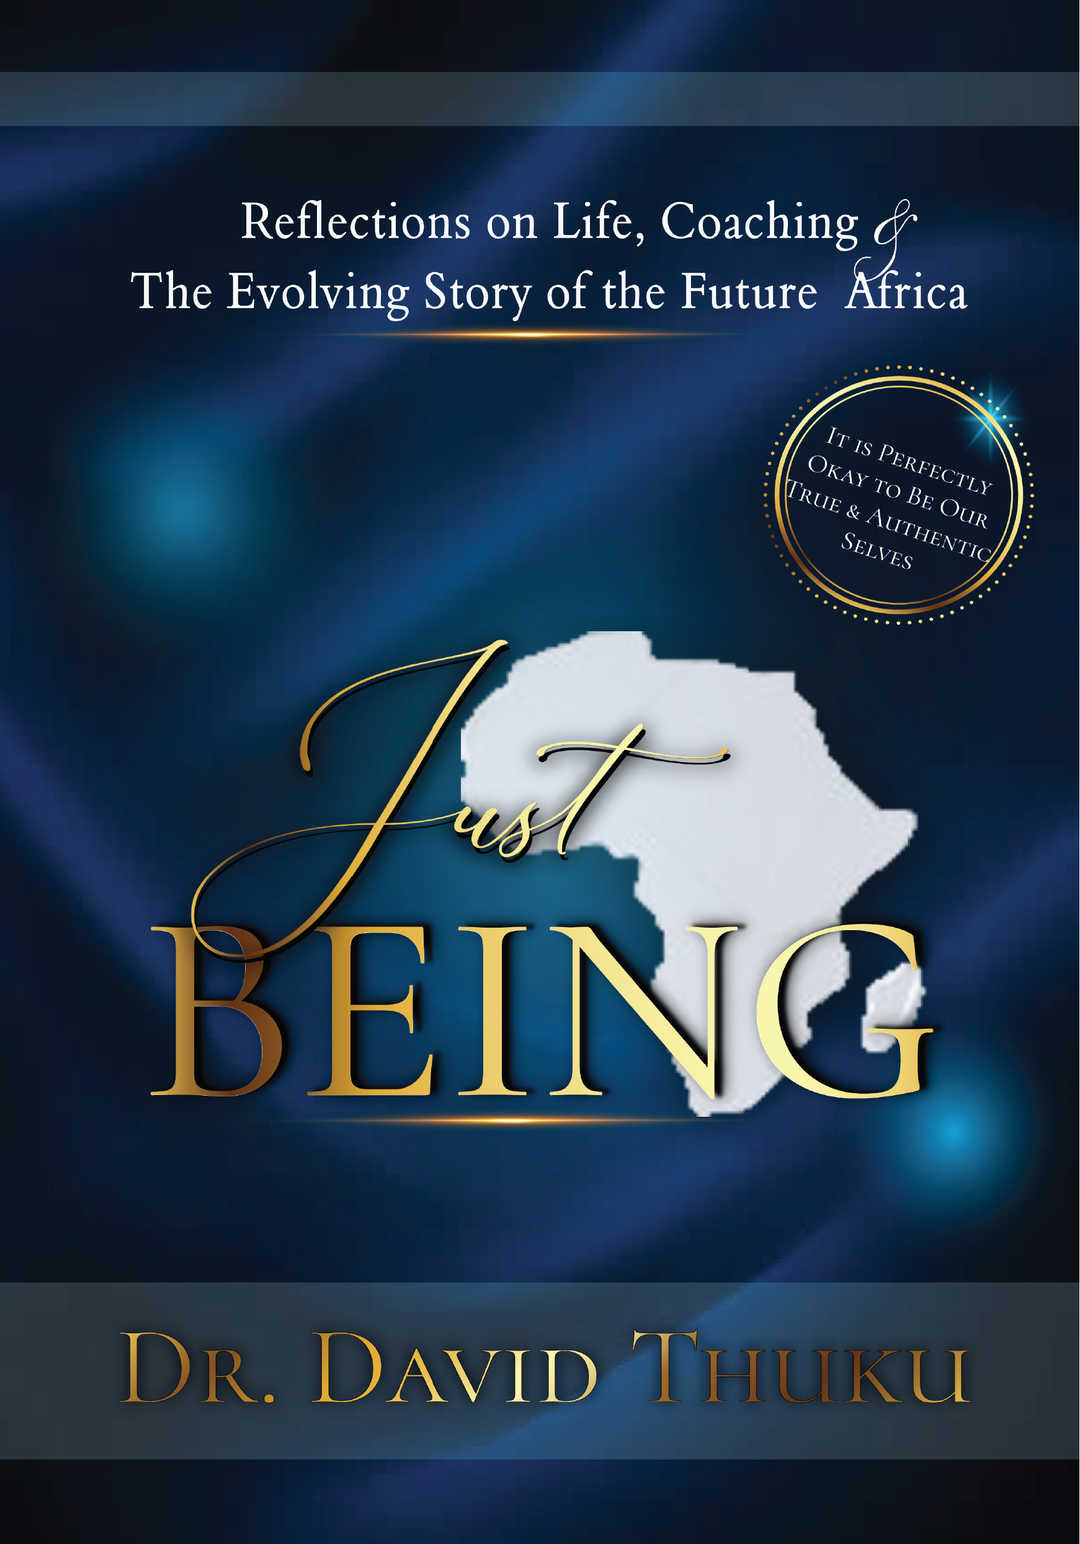 Just Being: Reflections on Life, Coaching and The Evolving Story of the Future Africa